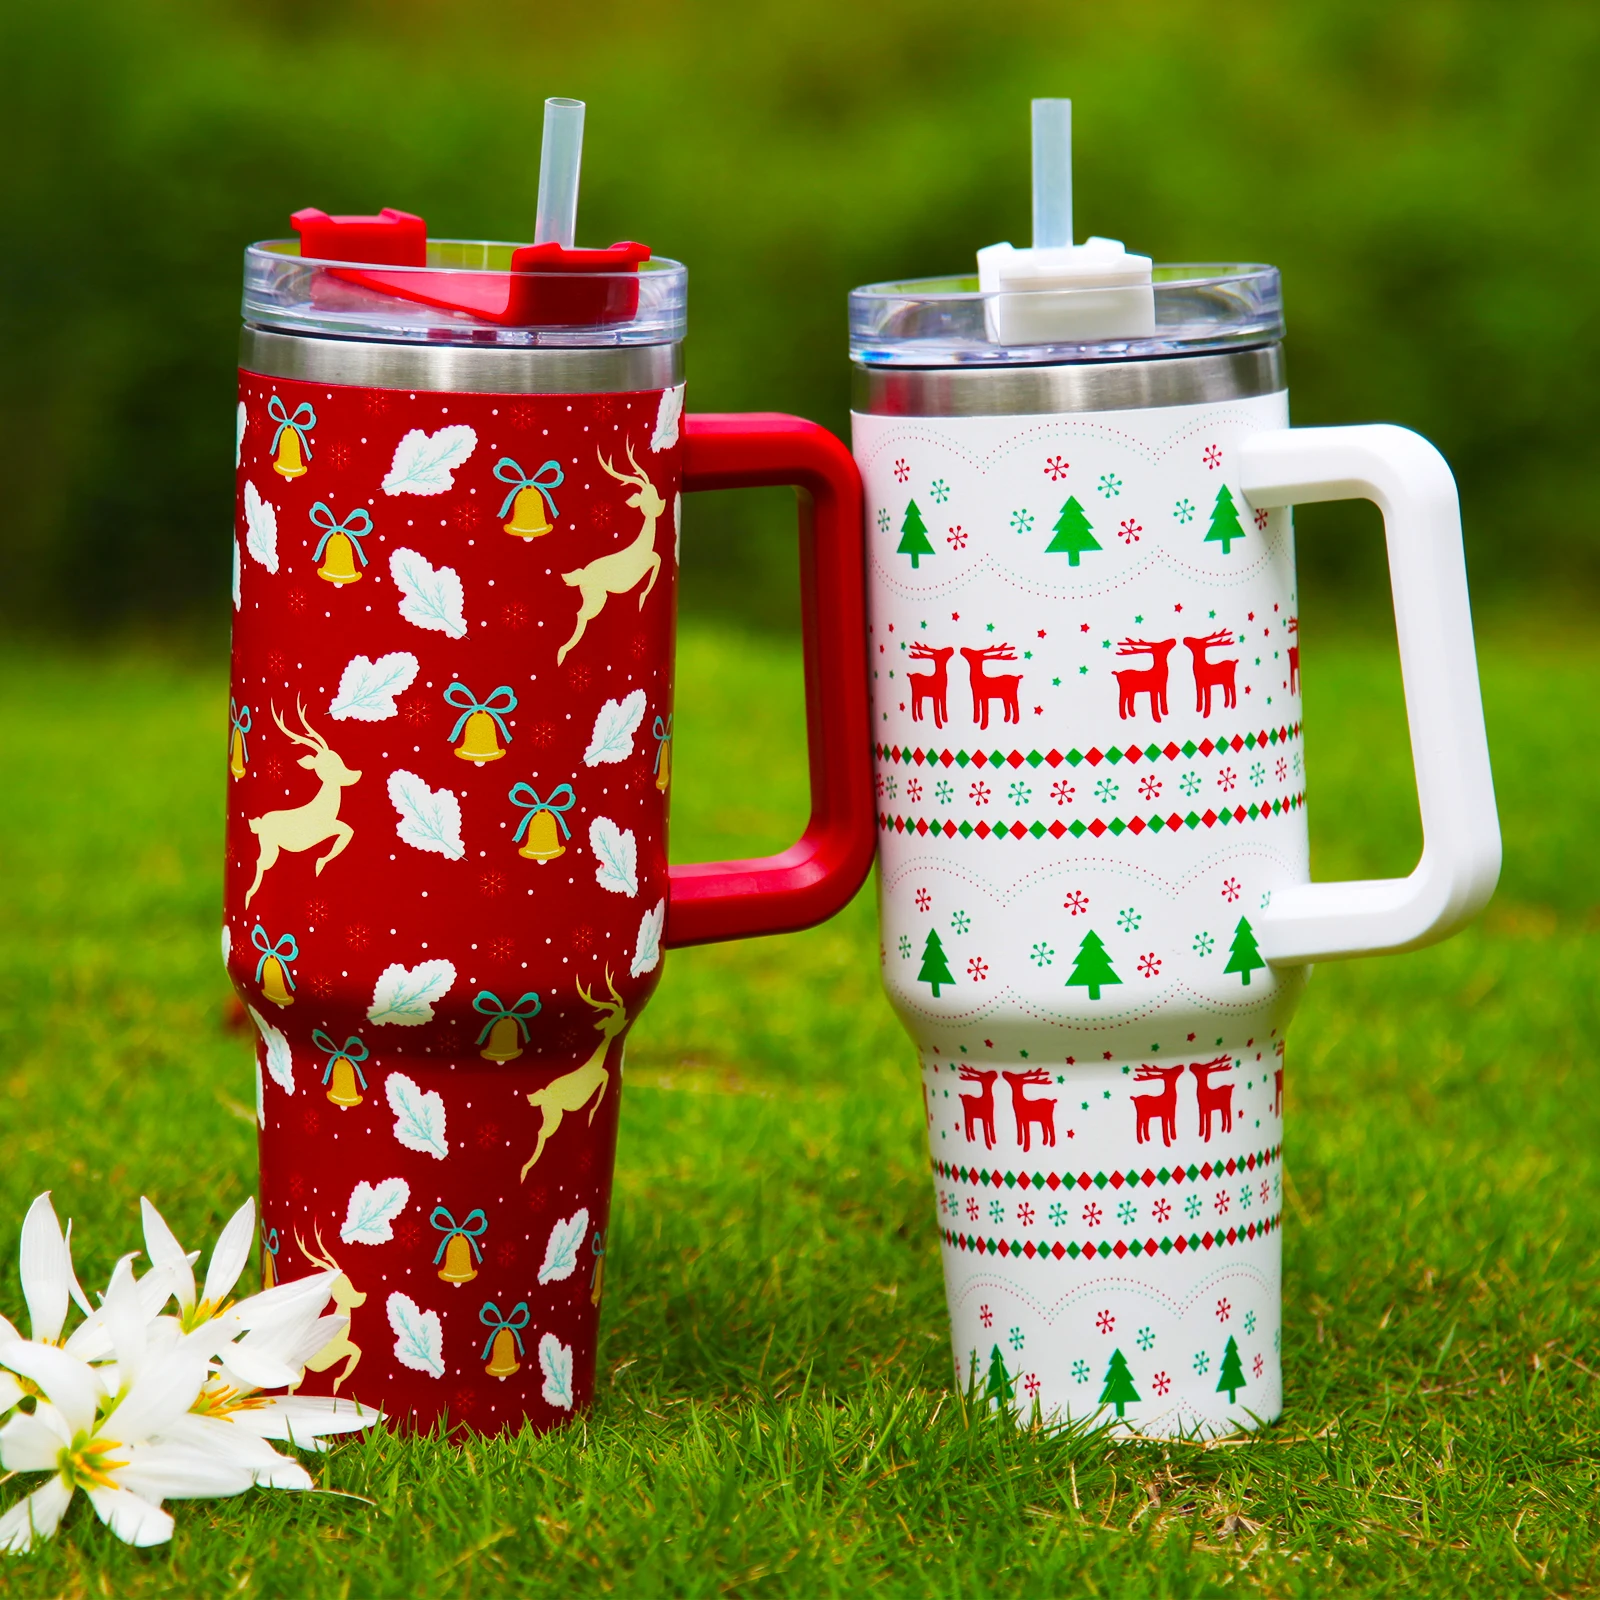 https://ae01.alicdn.com/kf/S2ce3fd496dd4434181355551e90a2f815/Christmas-Thermos-Water-Bottle-with-Handle-and-Straw-Lid-40oz-Coffee-Tumbler-Cup-Car-Mug-Vacuum.jpg